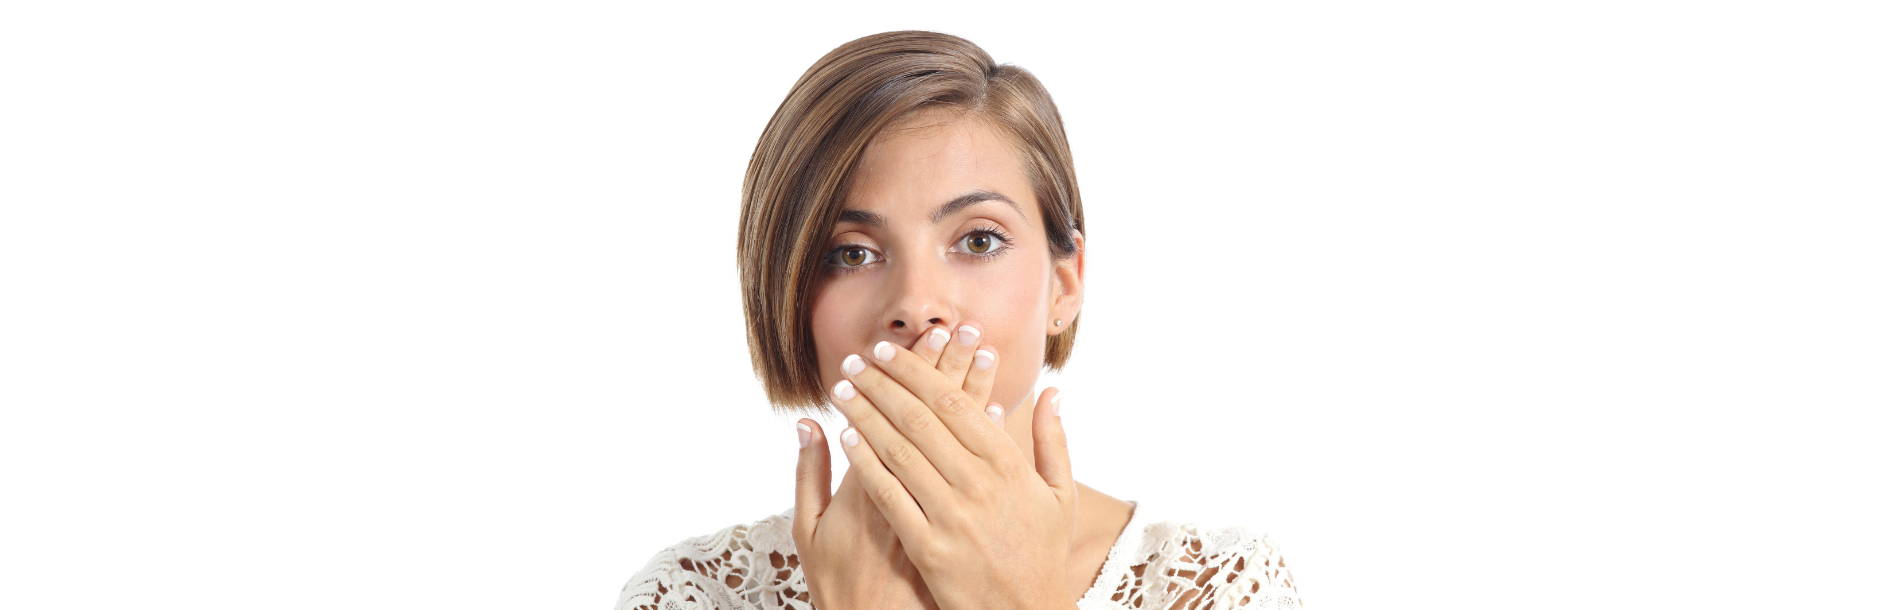 bad breath - what to do